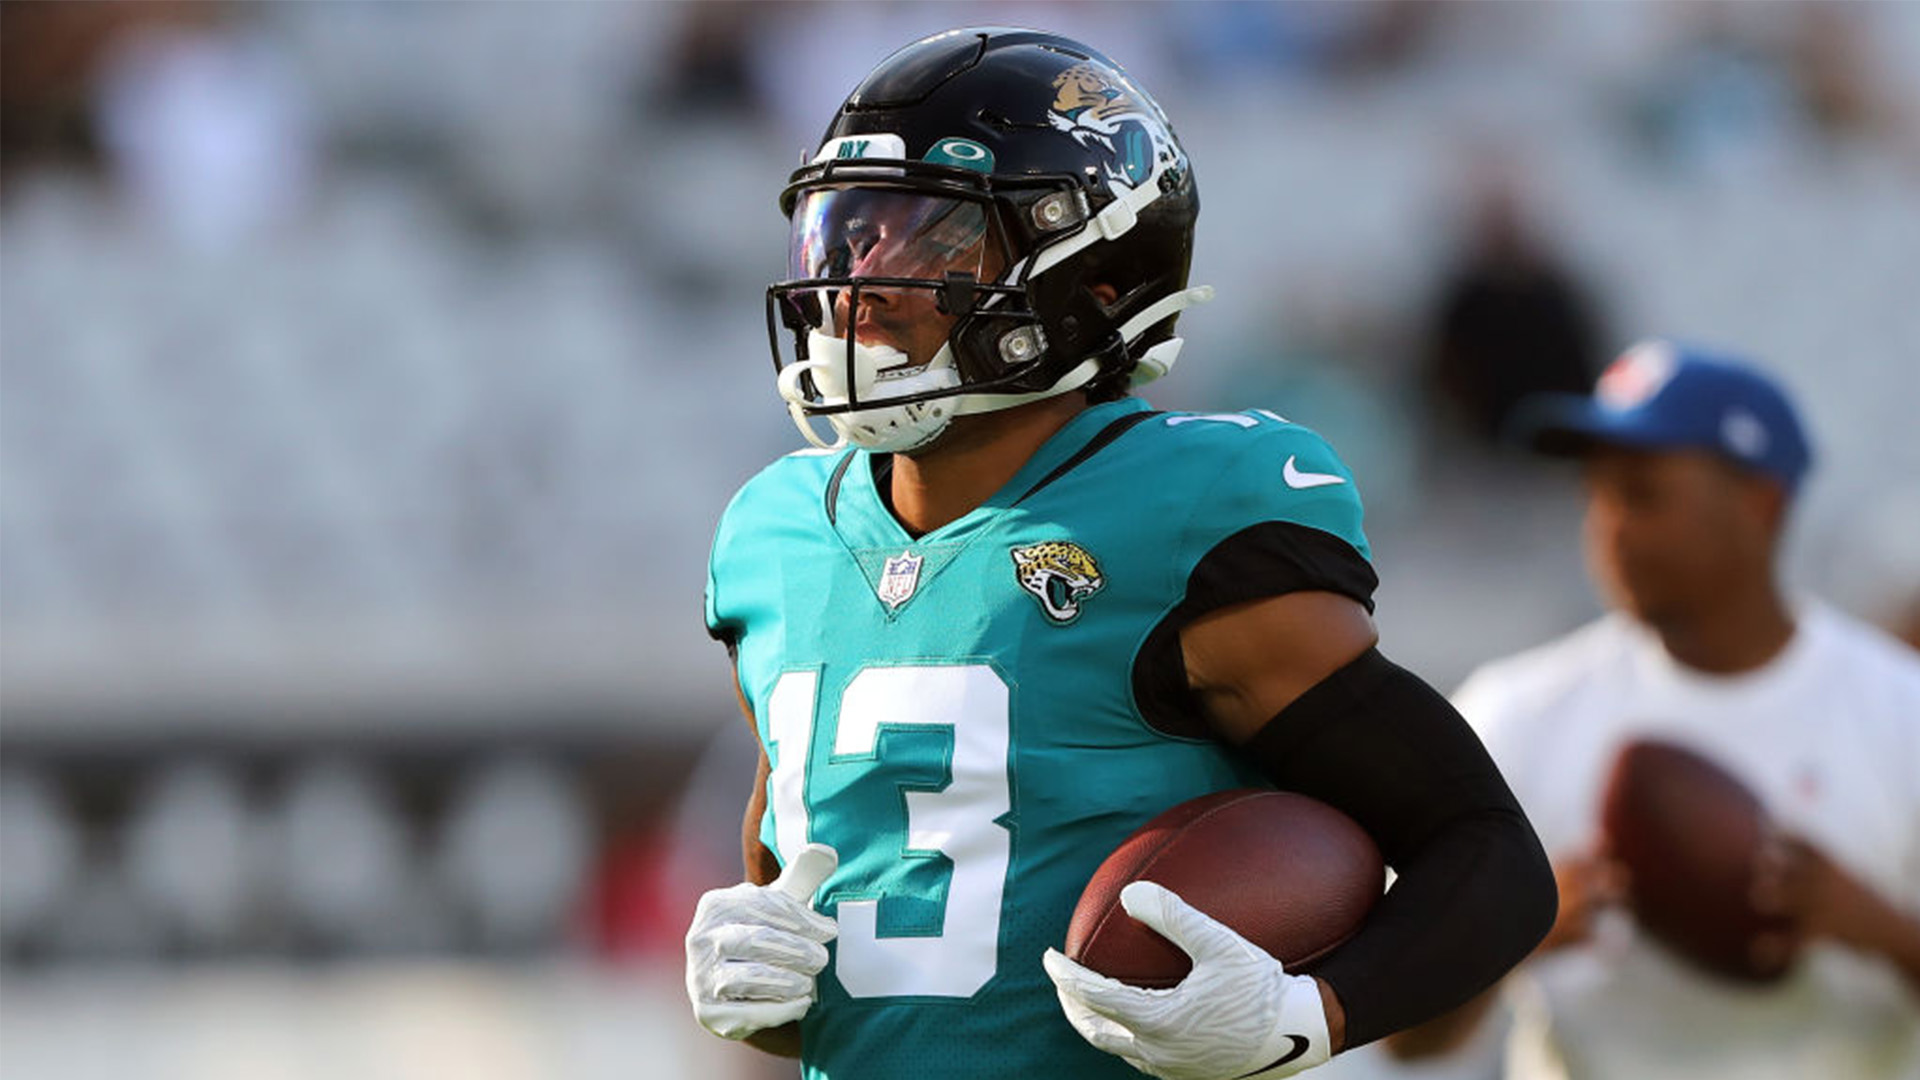 How Jacksonville Jaguars Wide Receiver Christian Kirk Earned $1M In A One Game